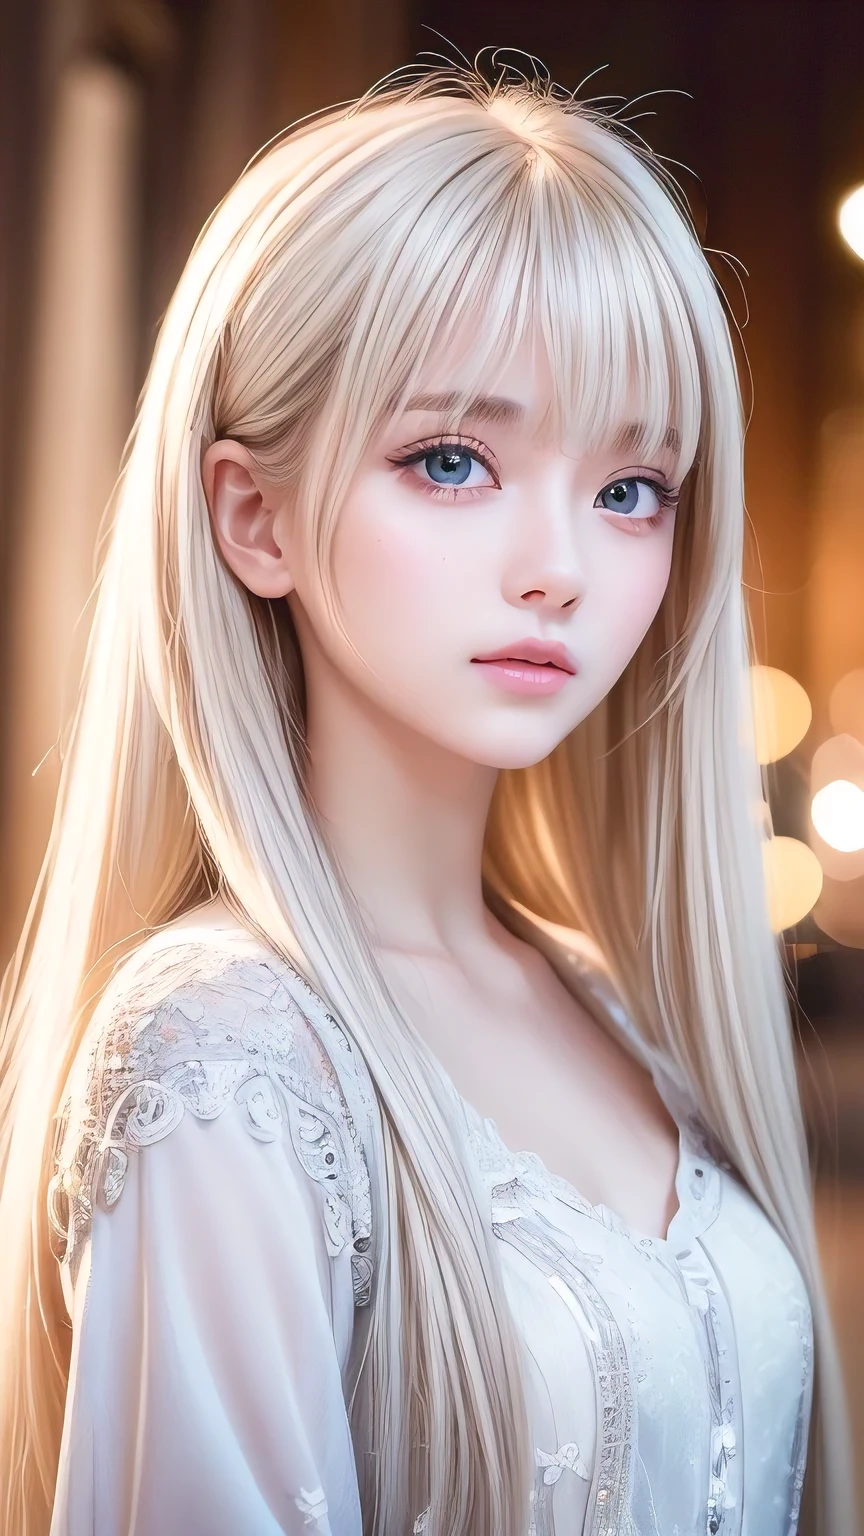 Live Shooting、(((Portraits of extreme beauty)))、((Glowing White Skin))、1 girl、Beautiful 11 year old girl from Prague、((Bright platinum blonde hair))、[Large, sparkling, light blue eyes]、Shiny, glossy skin、Silky super long straight hair、eyeliner、Long bangs、Bangs between the eyes、Dancing Hair、((masterpiece、最high quality、Super detailed、Film Light、Intricate details、High resolution、8k、Very detailed))、Detailed Background、8K UHD、Digital SLR、Soft Light、high quality、Film Grain、Fuji XT3 、Shallow depth of field、Natural light、（No Hands）、Looking up、round face、Casual shirts、Small Face Beauty